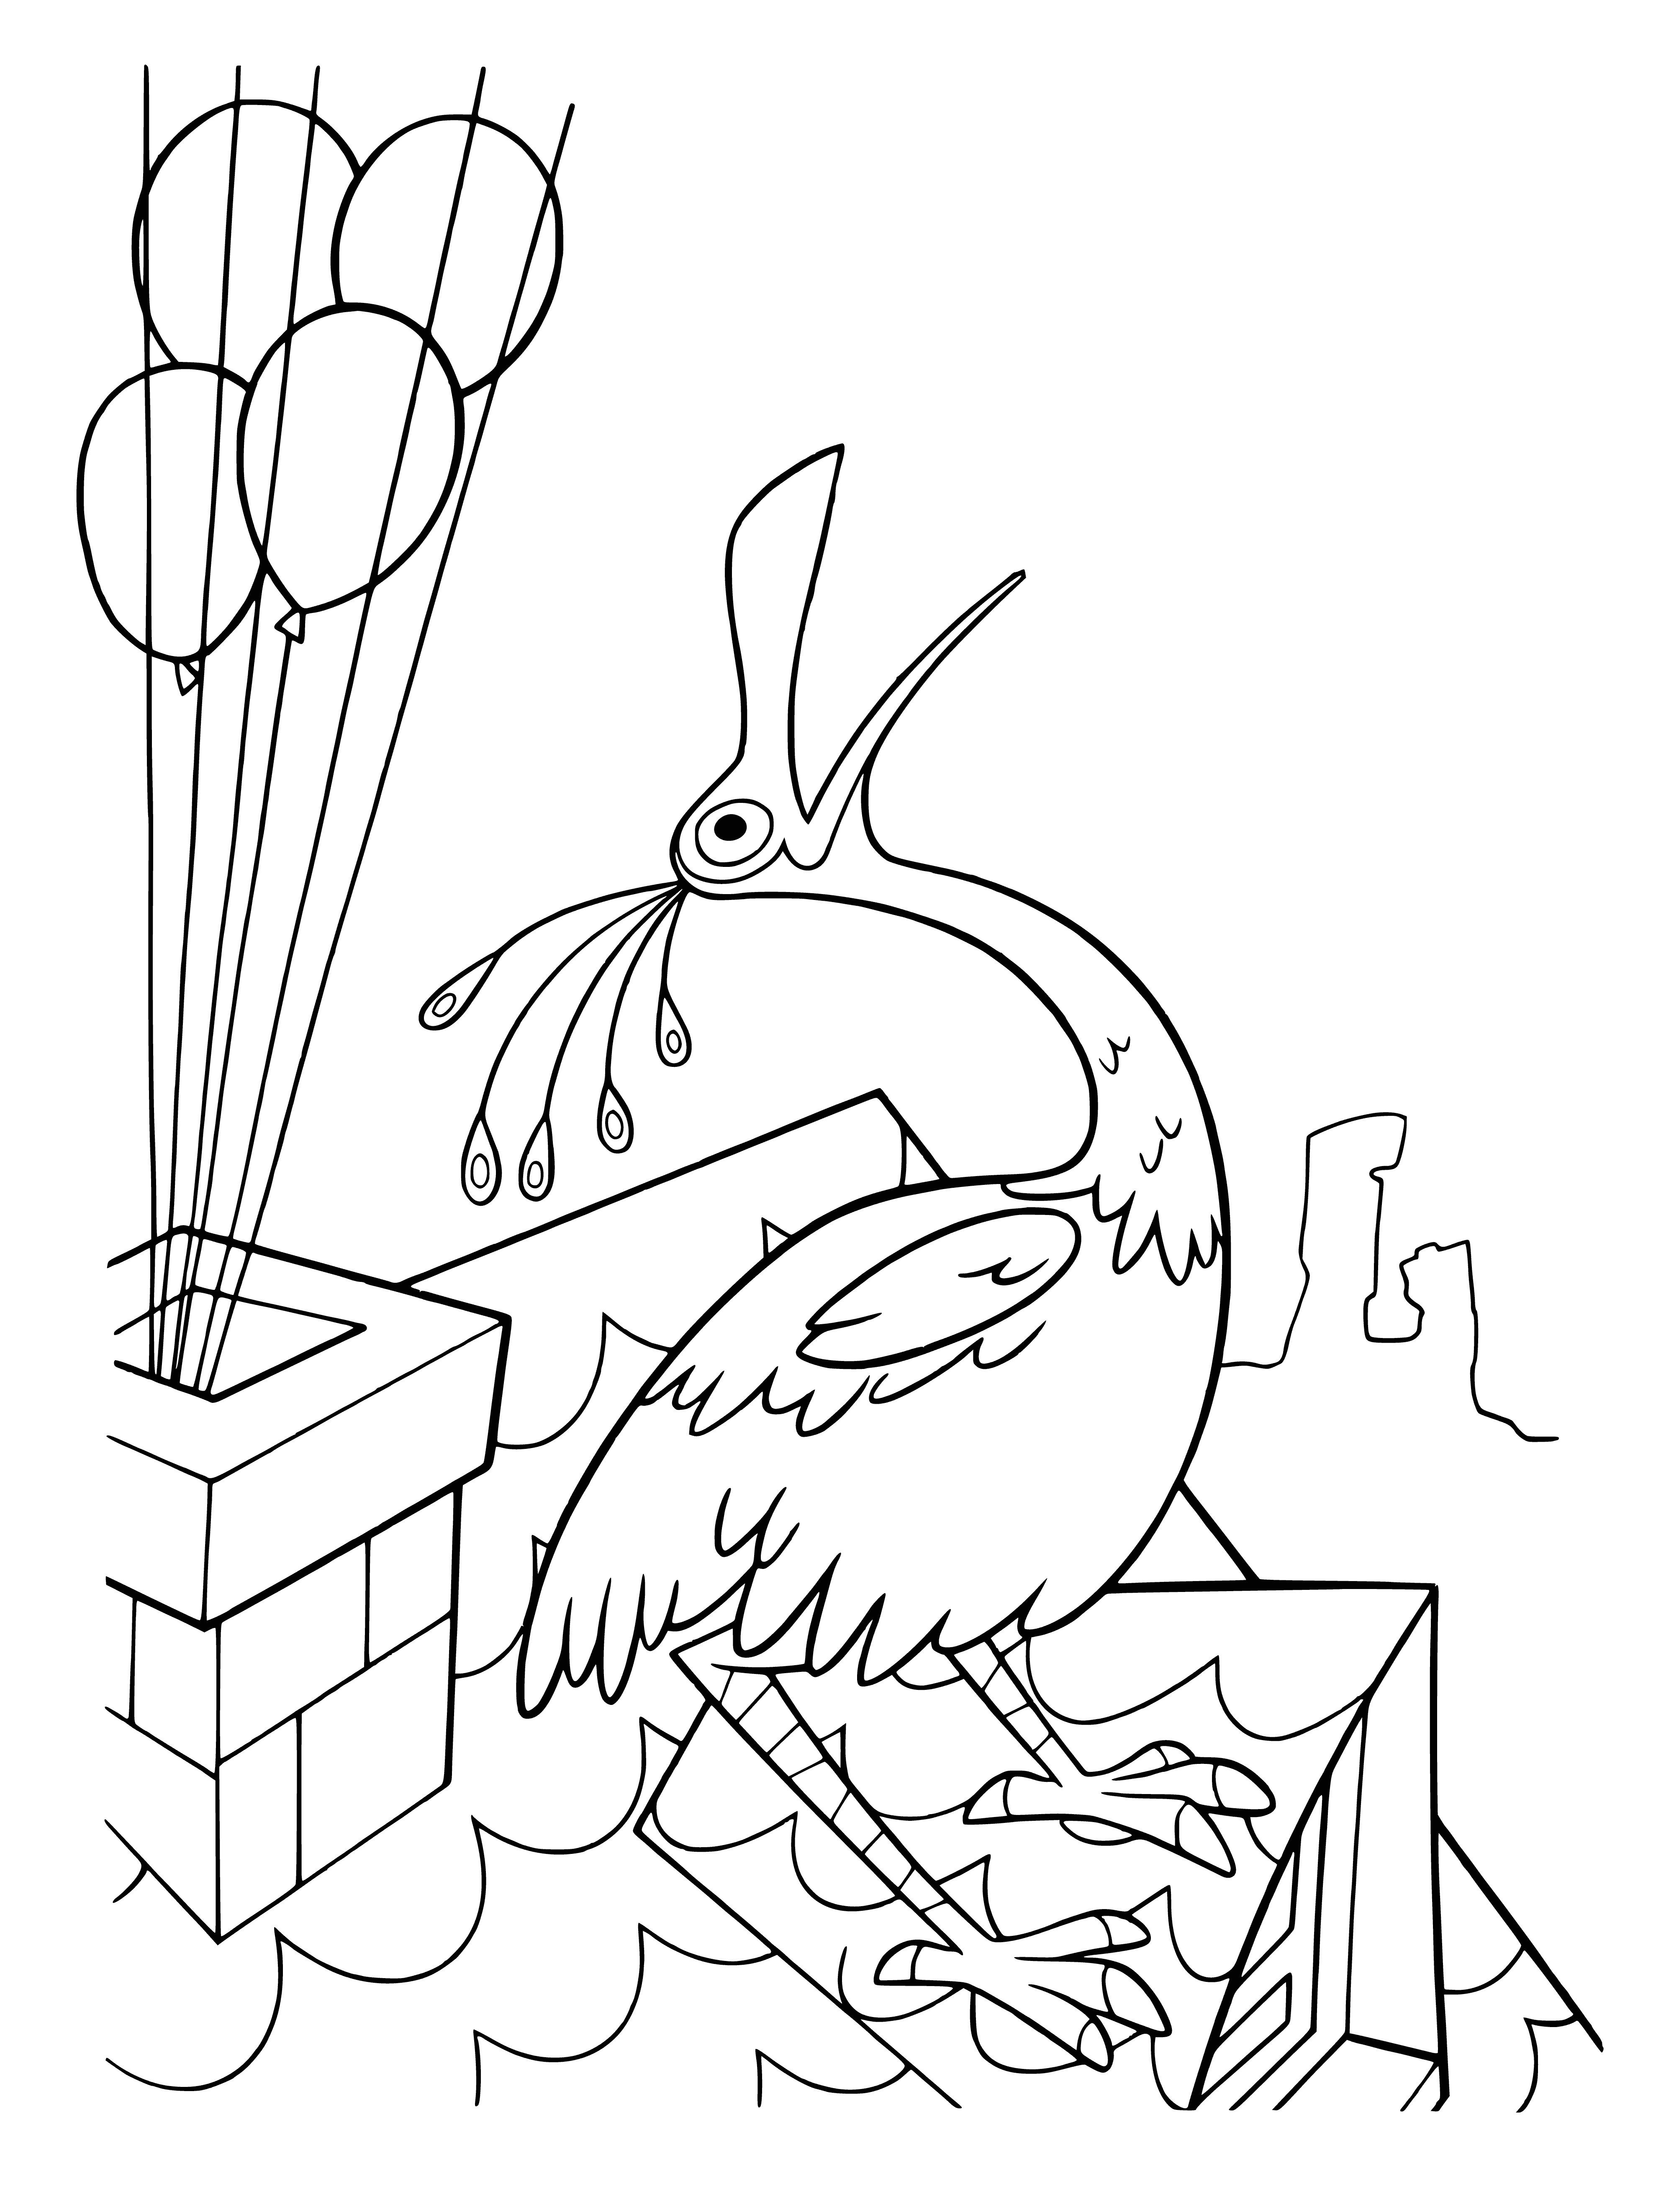 coloring page: A small brown bird sings atop a bare tree branch, eyes closed.